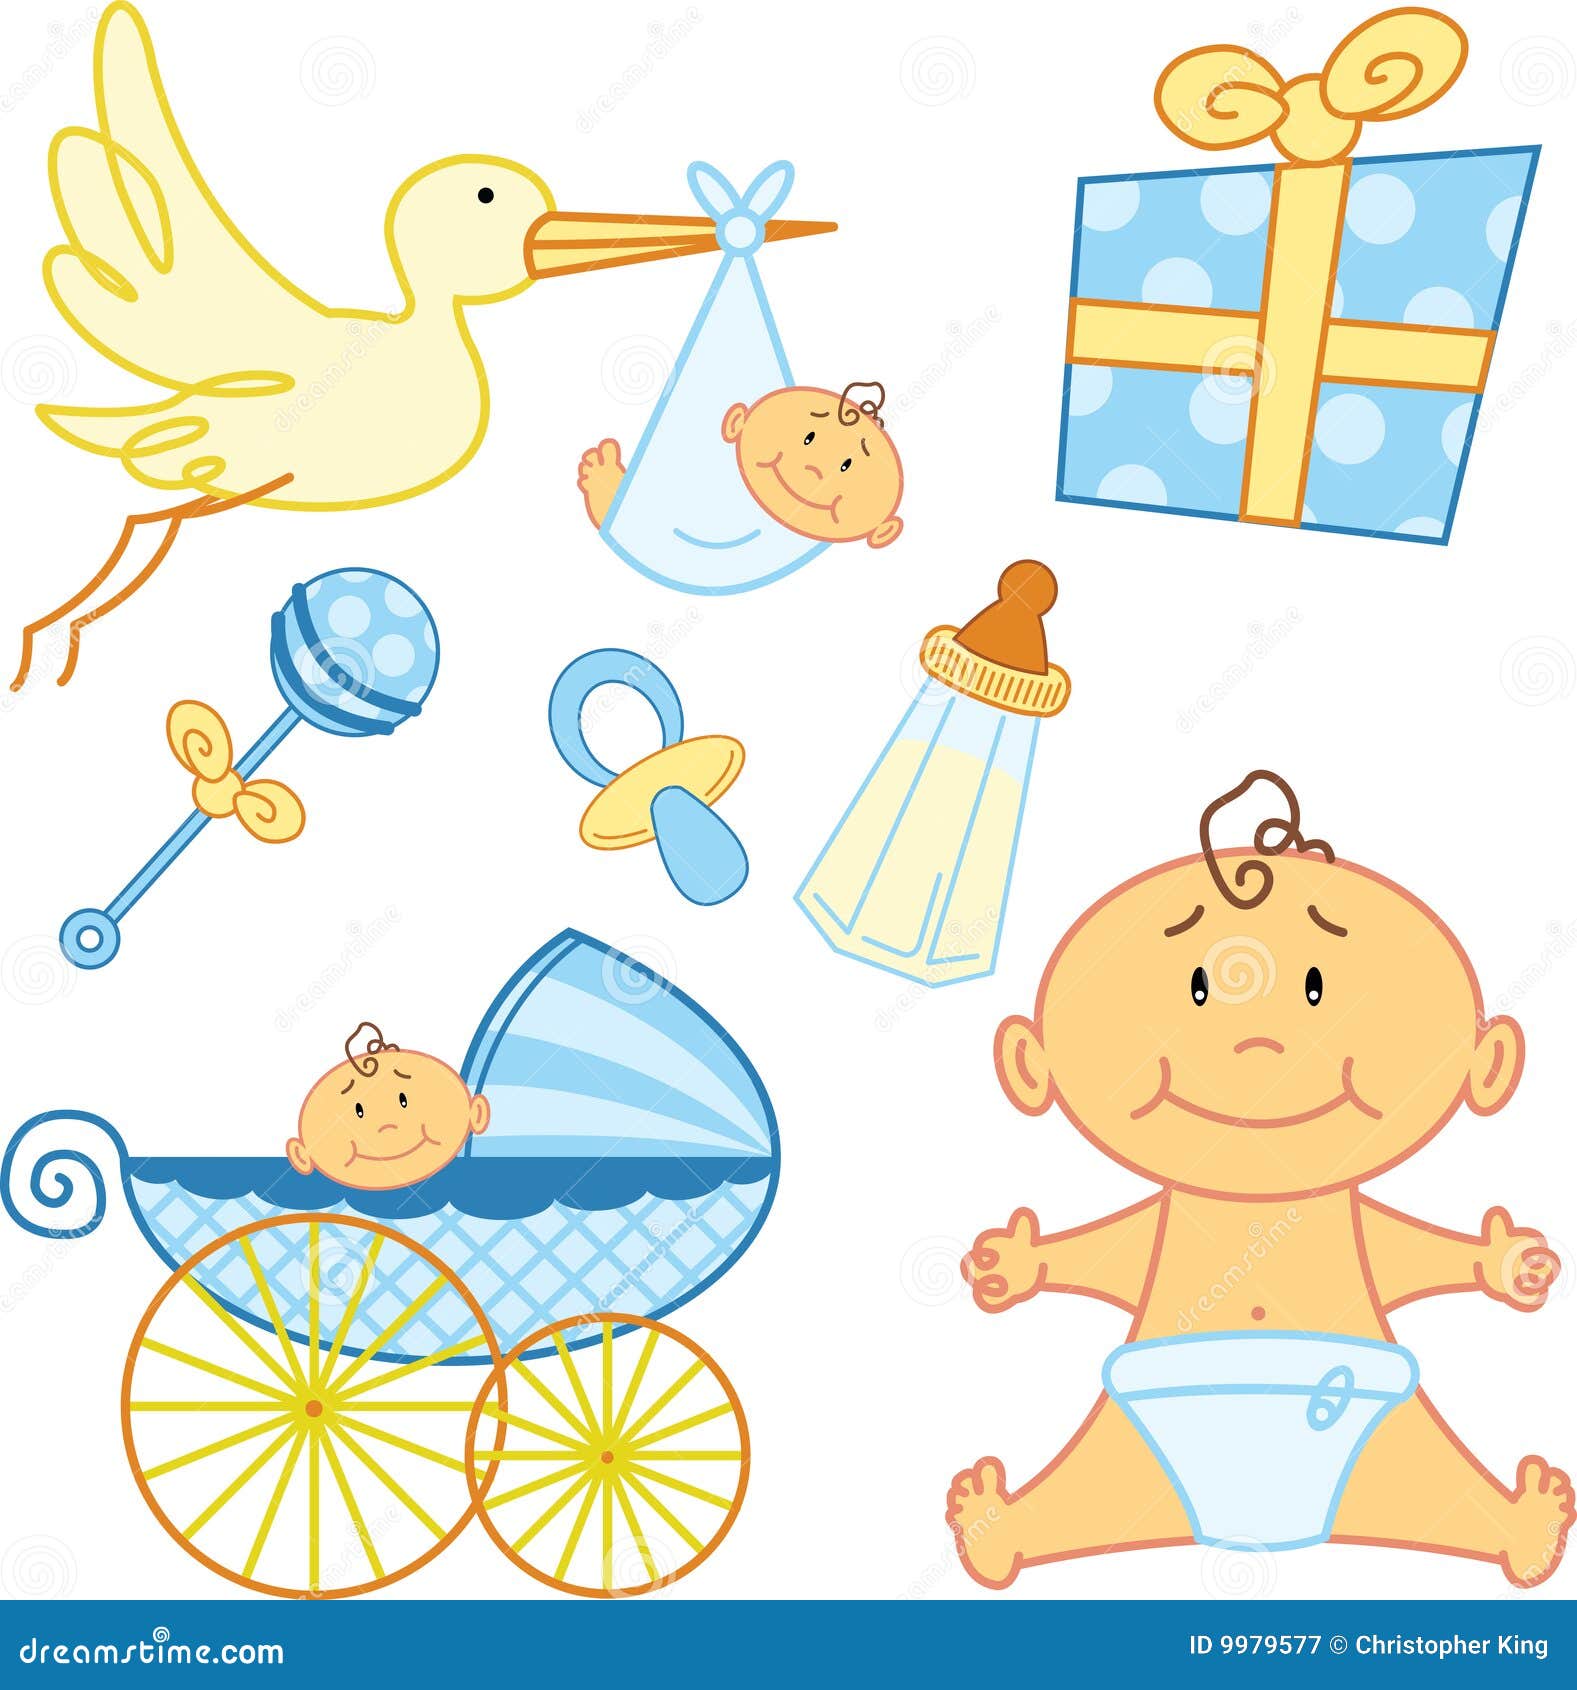 congratulations new baby clipart free - photo #39